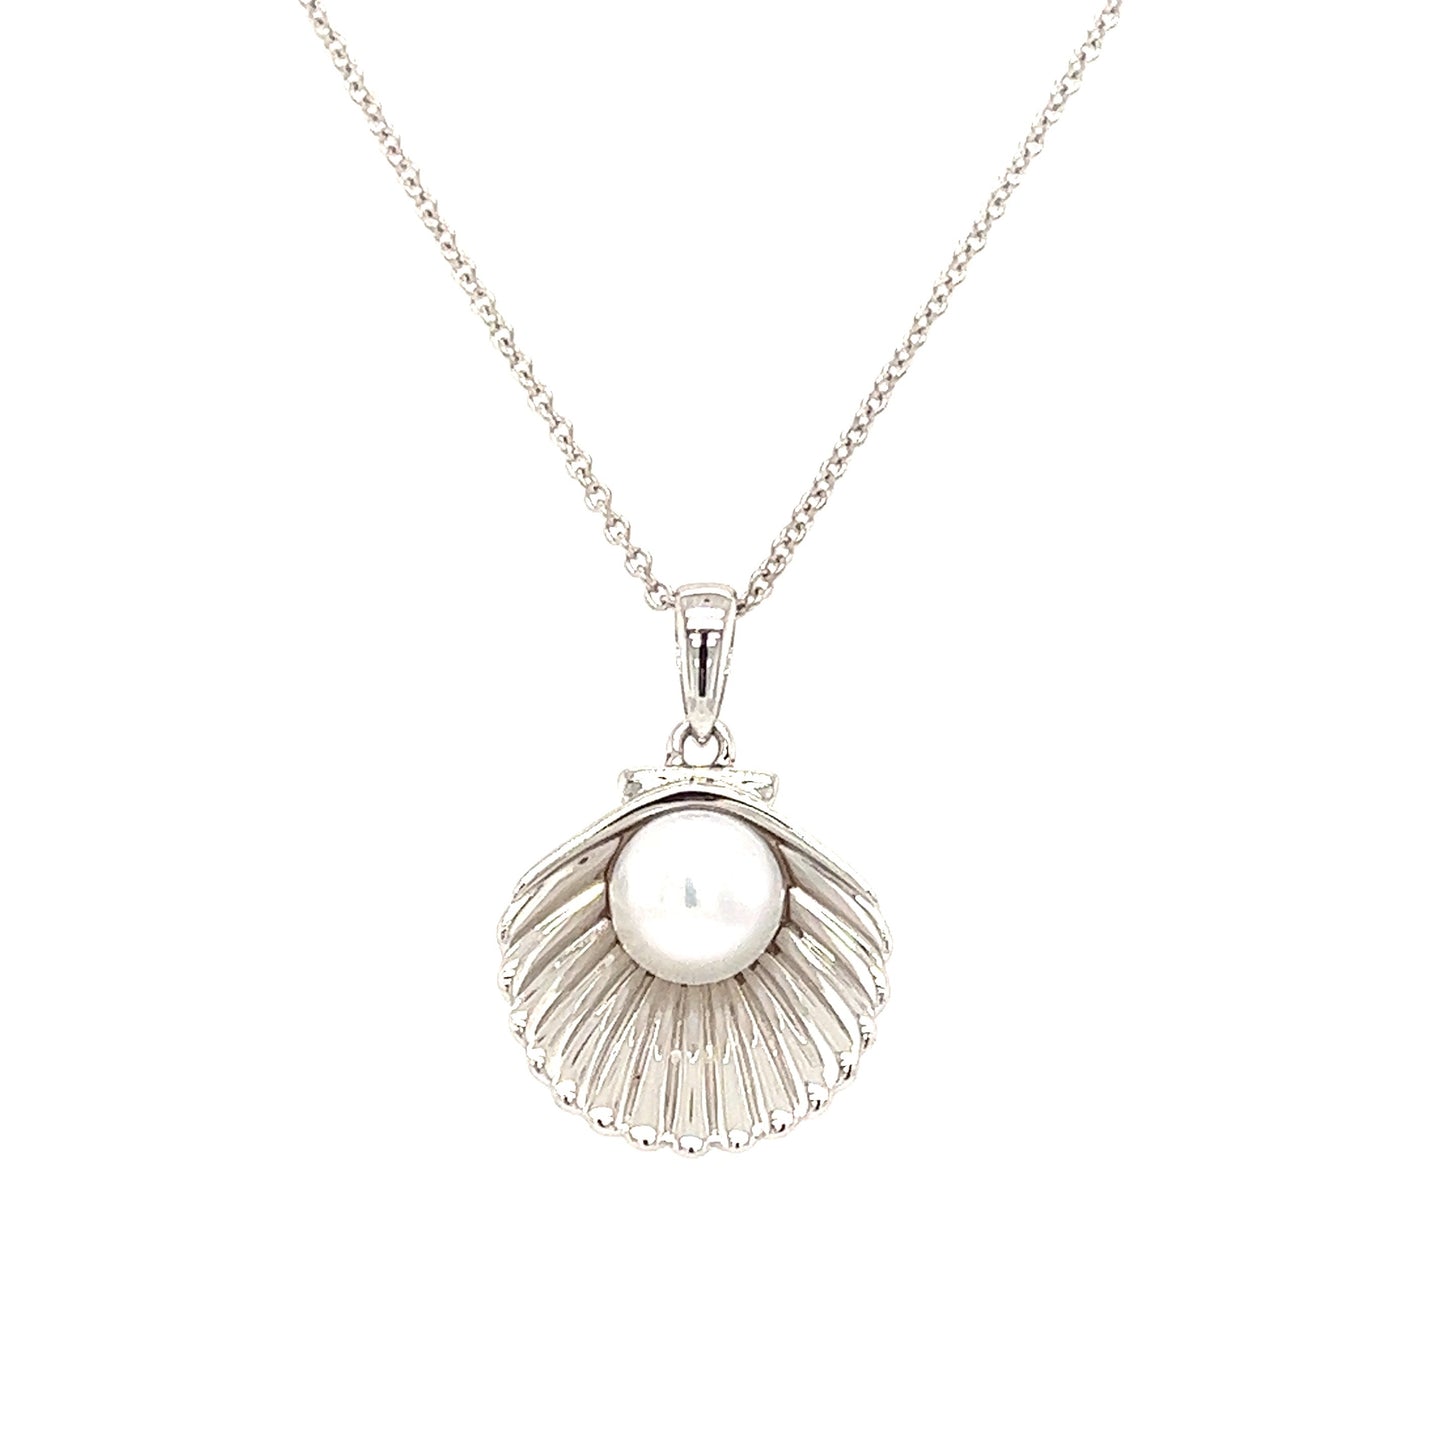 Shell Necklace with White Pearl in Sterling Silver Necklace Front View